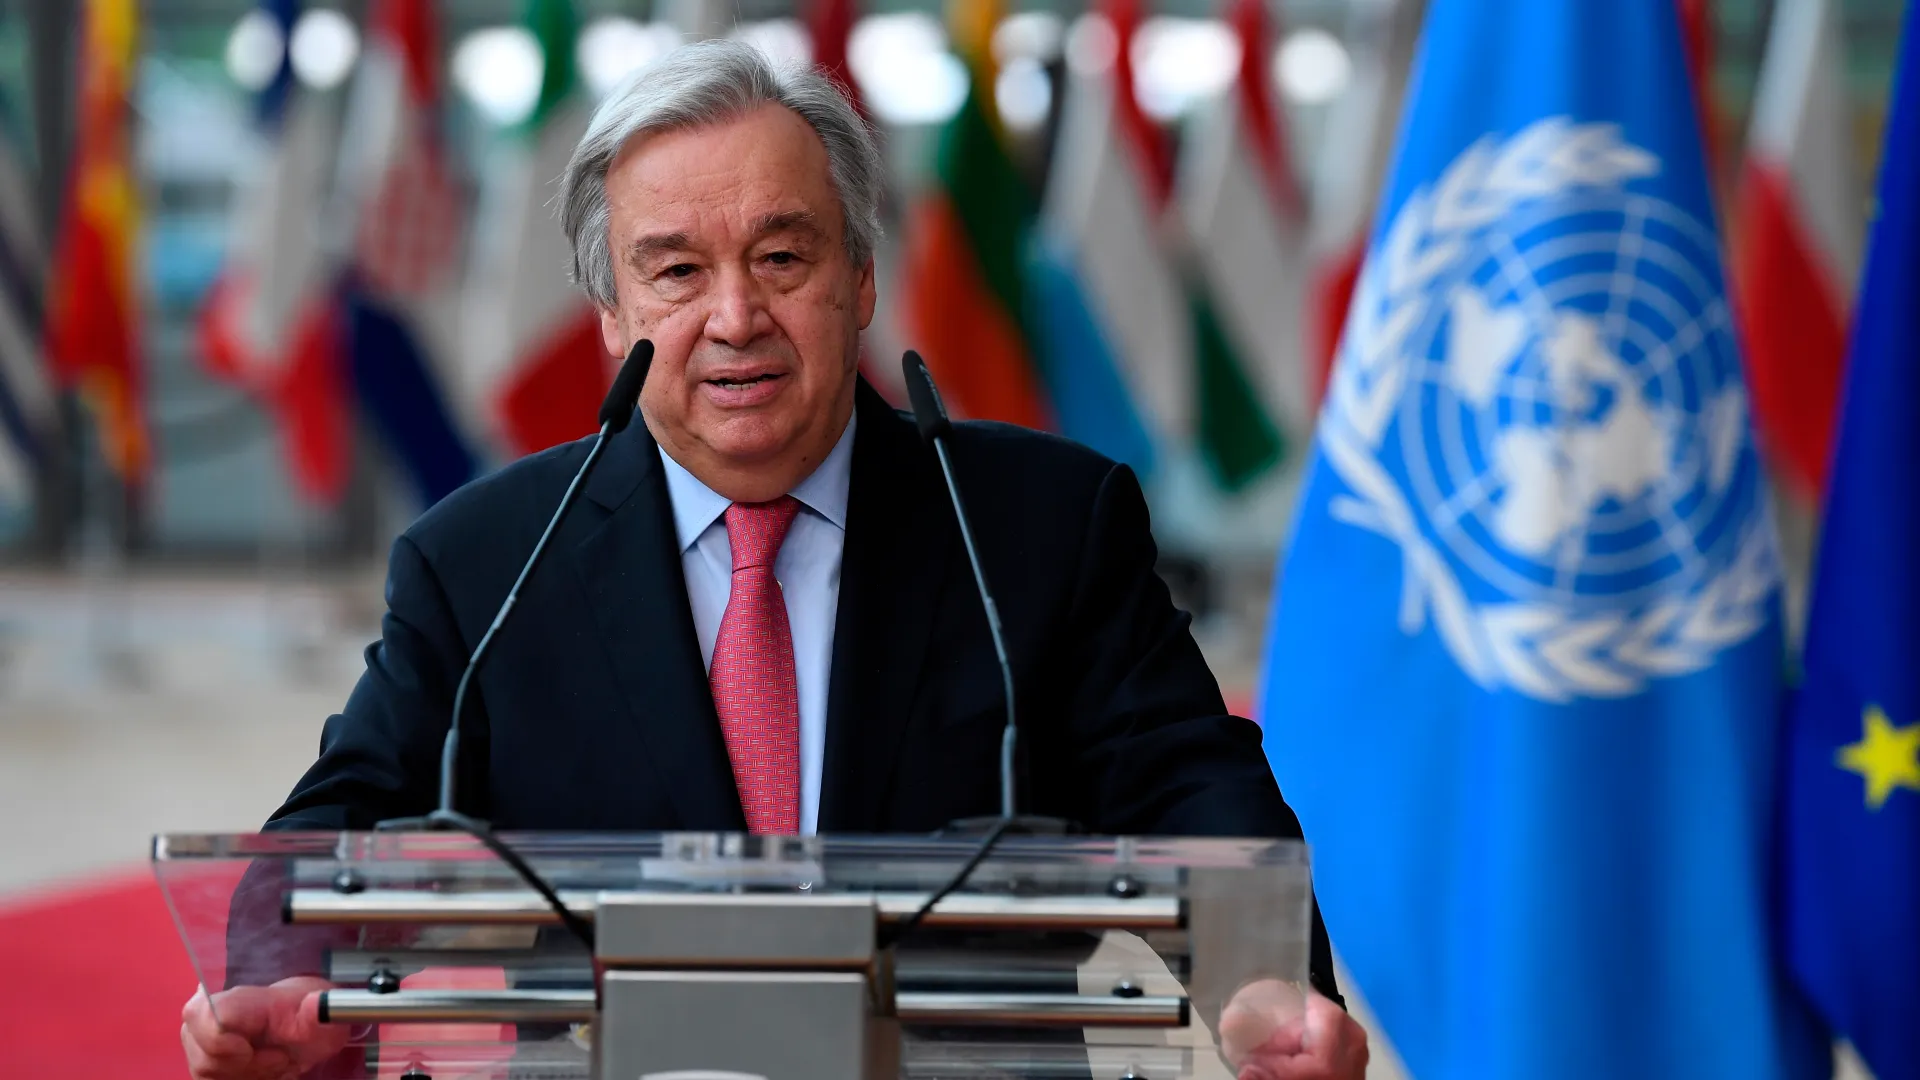 UN Chief Alleges ‘Crimes Against Humanity' In Sudan